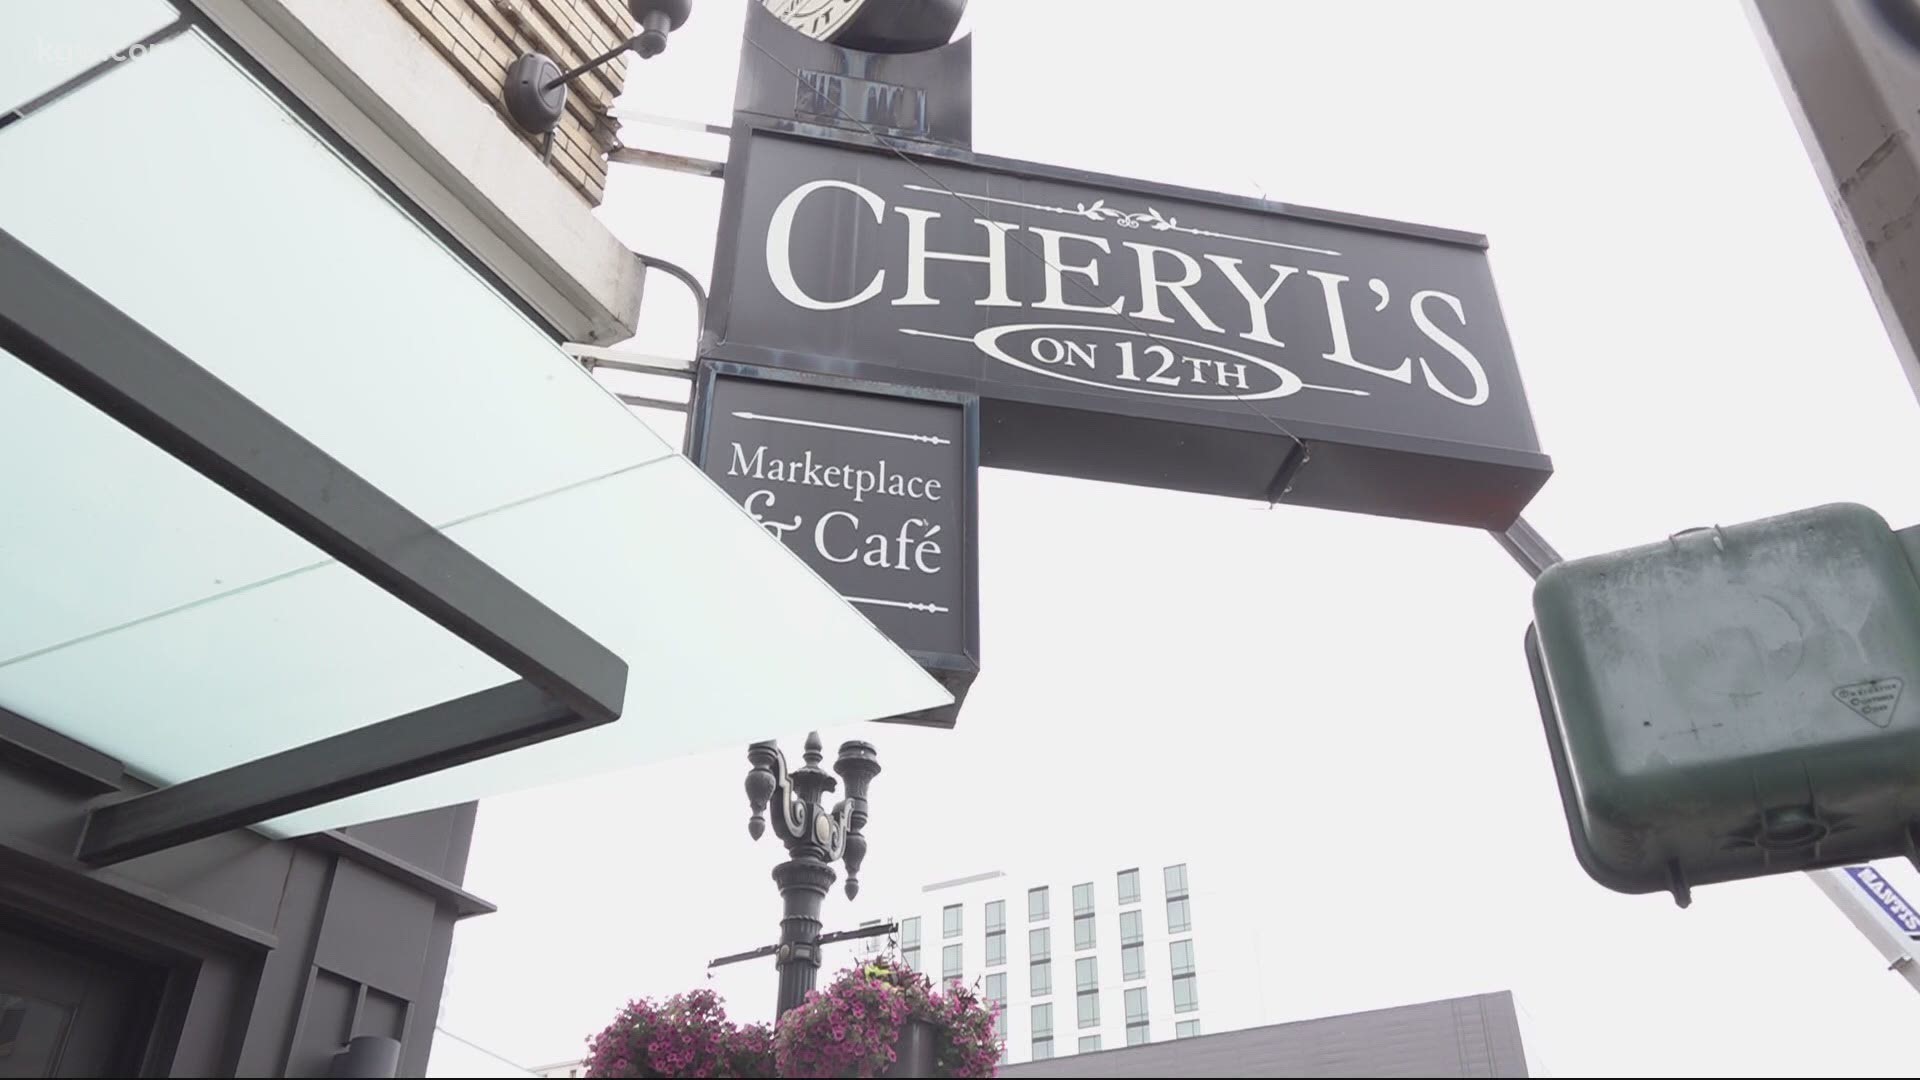 Cheryl's on 12th is back open for dine-in. Owners Ed and Cheryl Casey say customers will notice a lot of changes when they return to the restaurant.